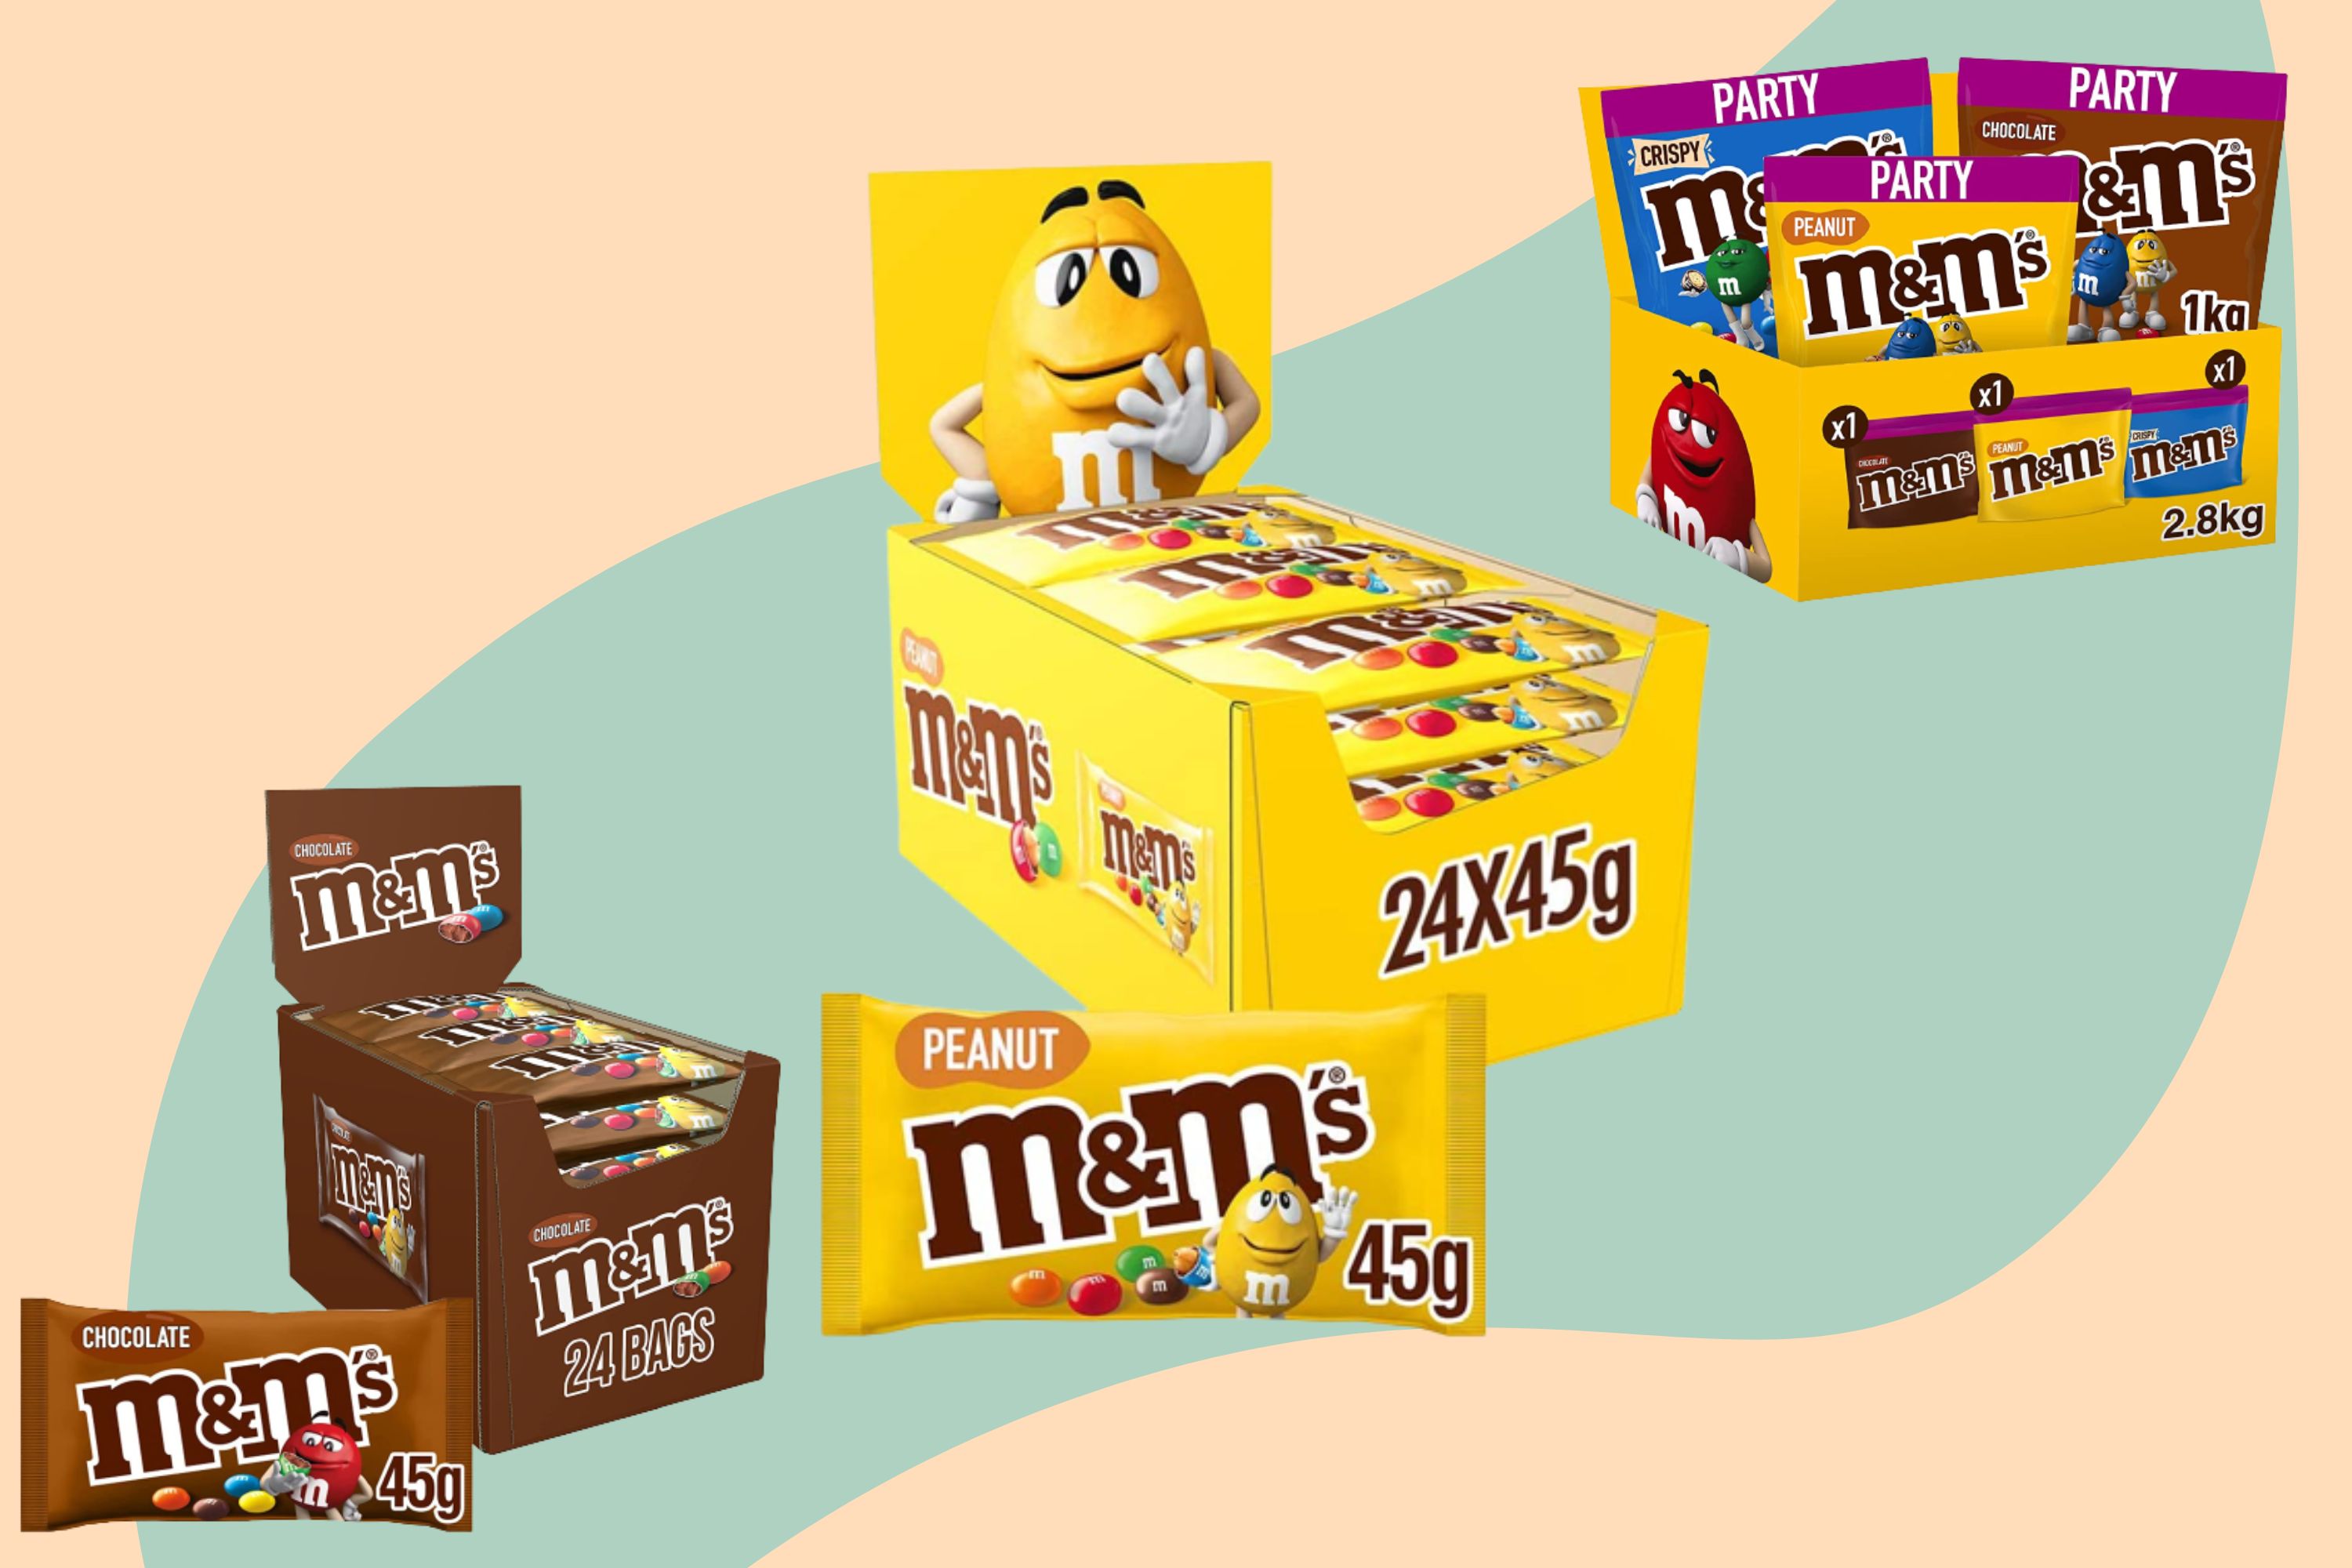 M&Ms Peanut Chocolate Party Bag Sharing party bag Pouch Gift Pack of 1  kg